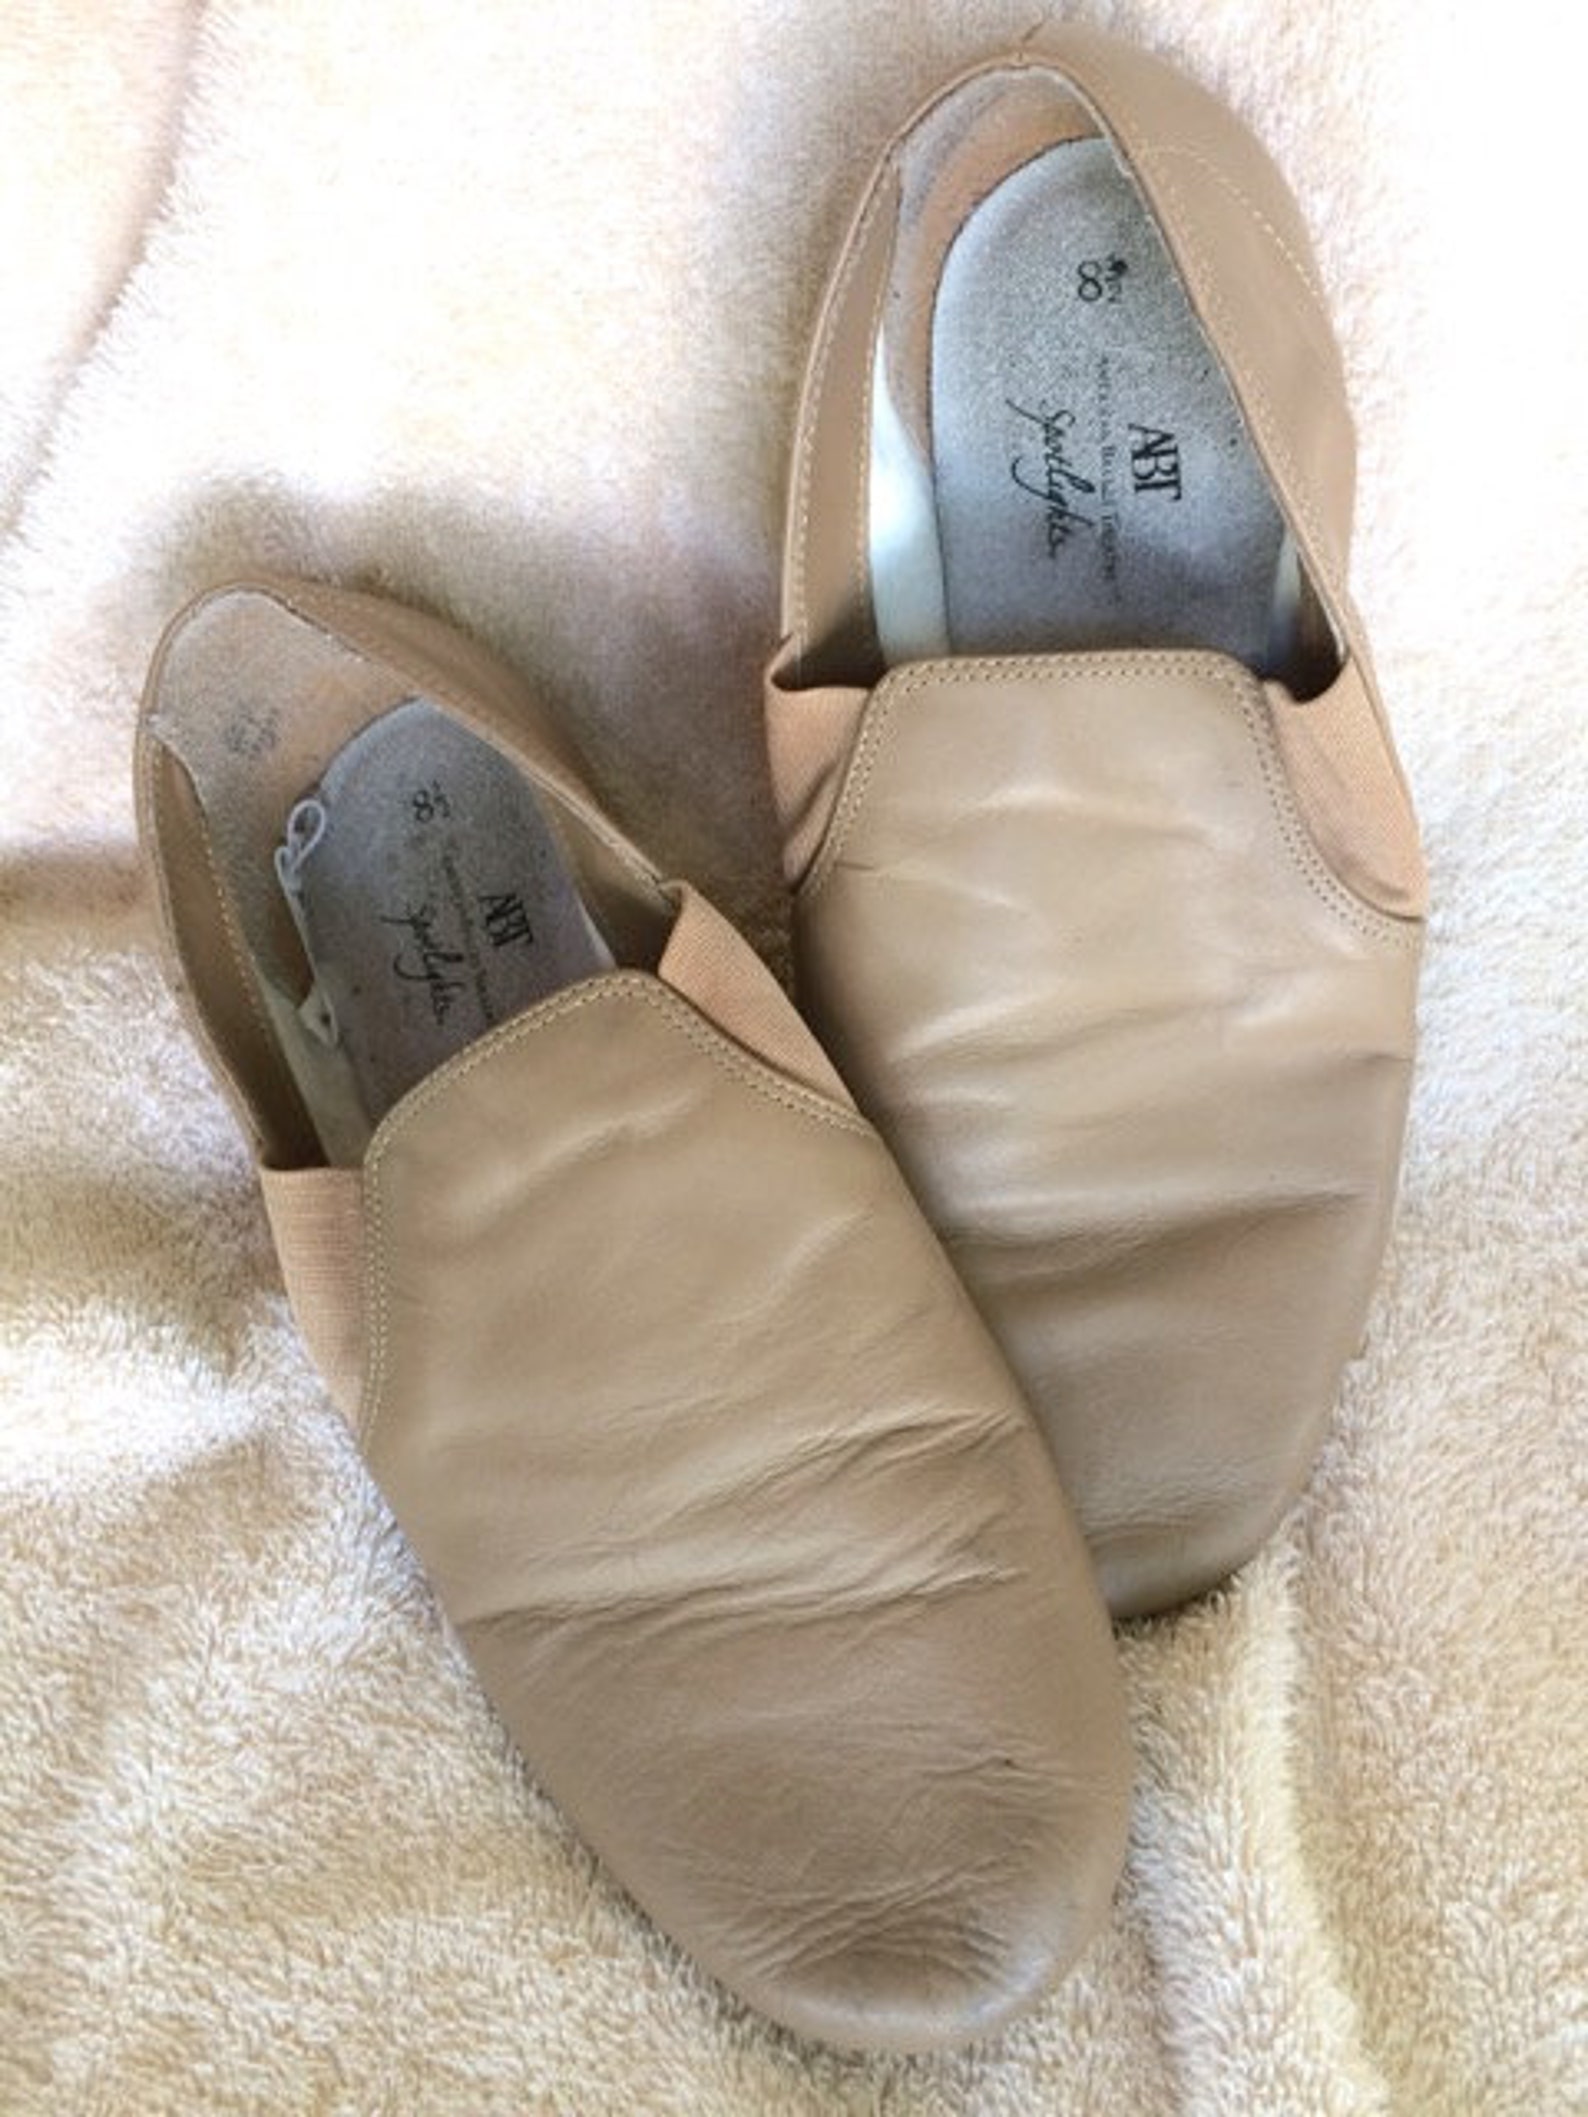 american ballet jazz shoes size 8.5 clean and ready to rehearse in. vintage classic ballet shoes for jazz dancing